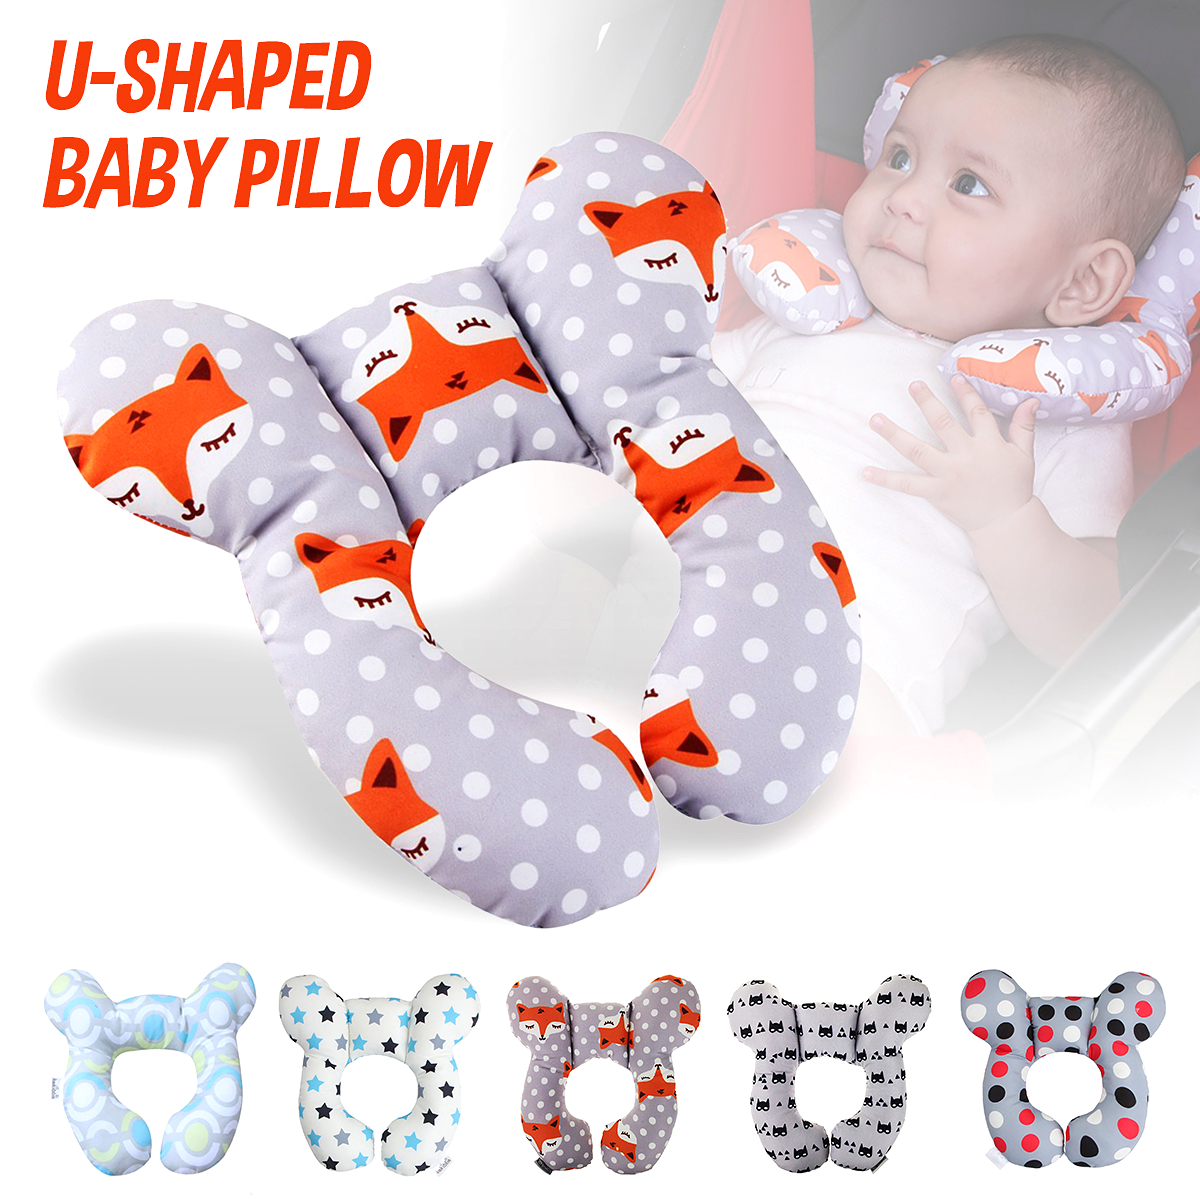 Cotton-U-shaped-Pillow-Baby-Stroller-Car-Seat-Cushion-Pad-Comfortable-Breathable-Kids-Body-Support-P-1761693-1